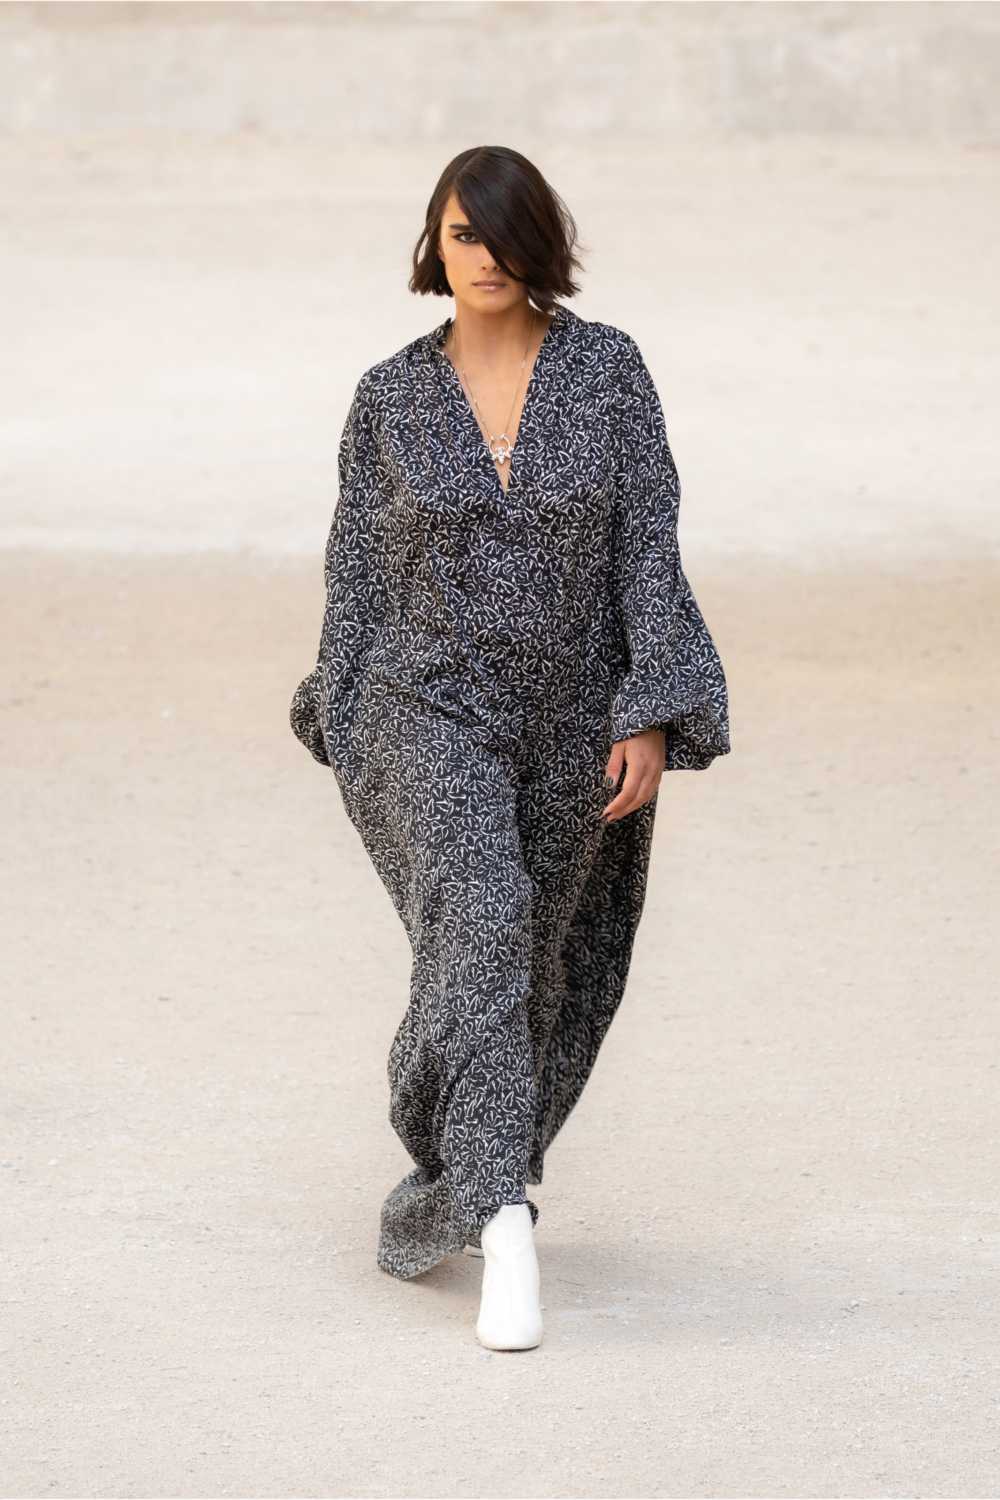 cruise chanel collection 2021 22 56